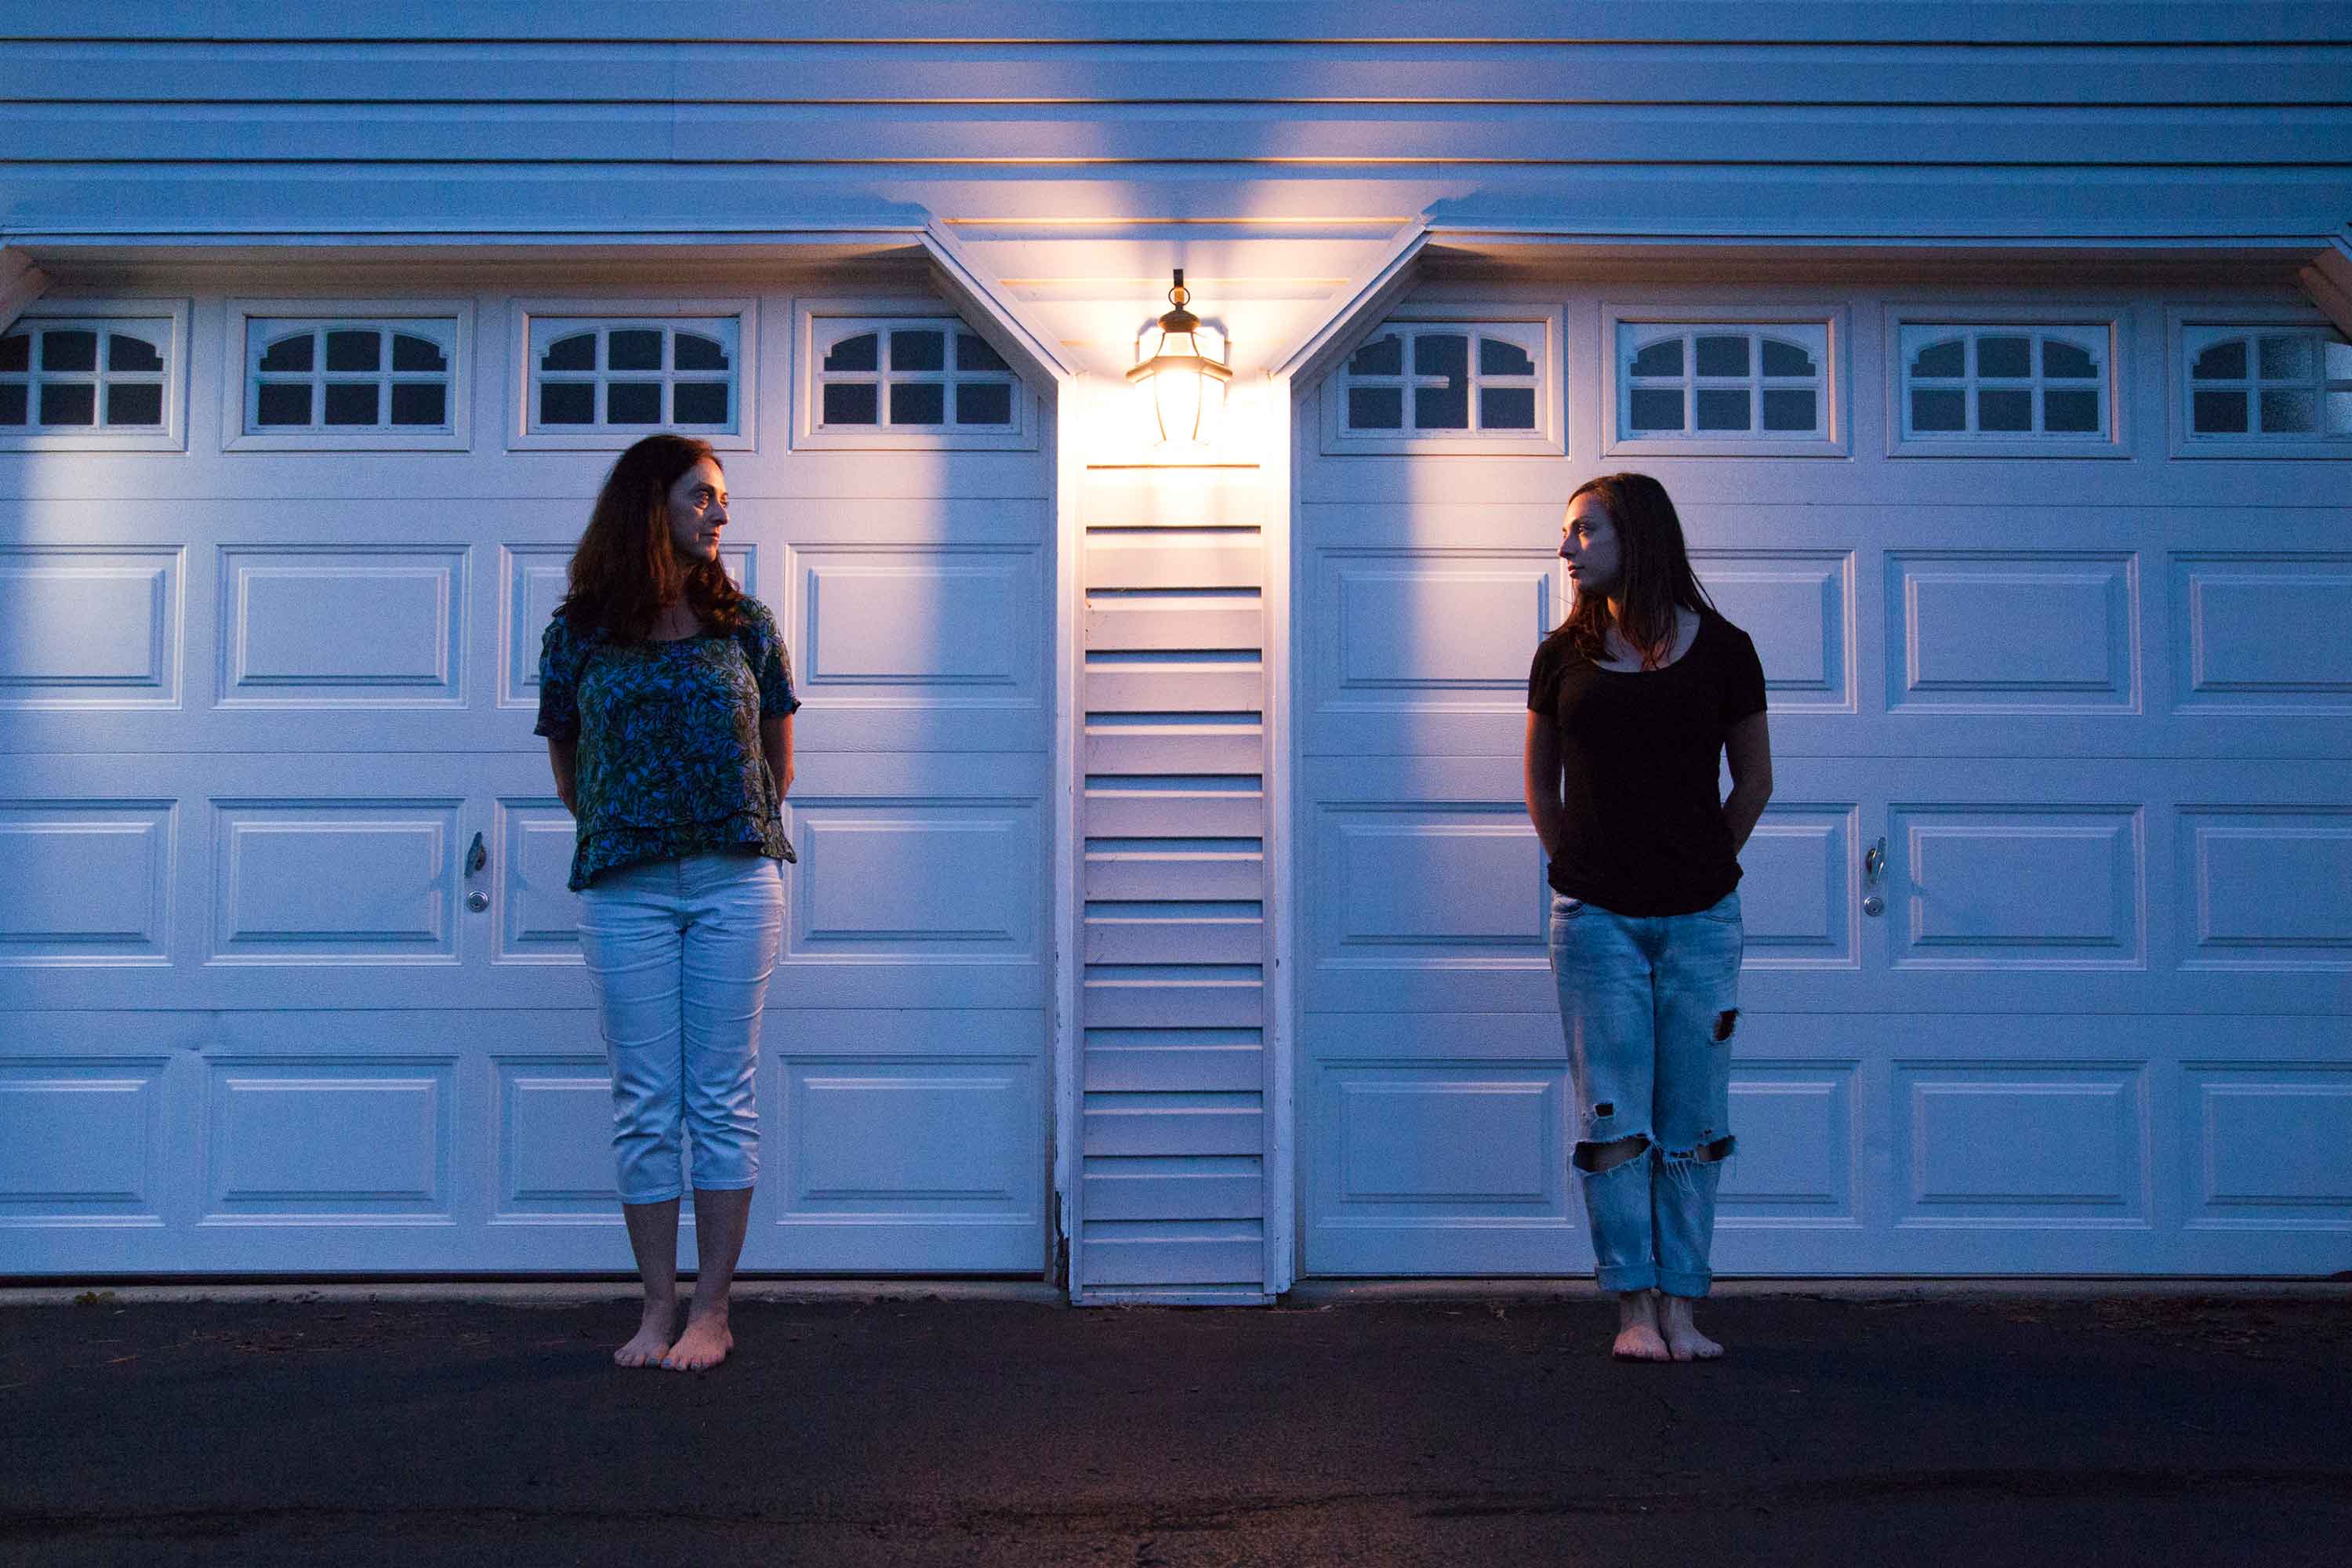 Mother and daughter standing in a driveway at night staring at one another.